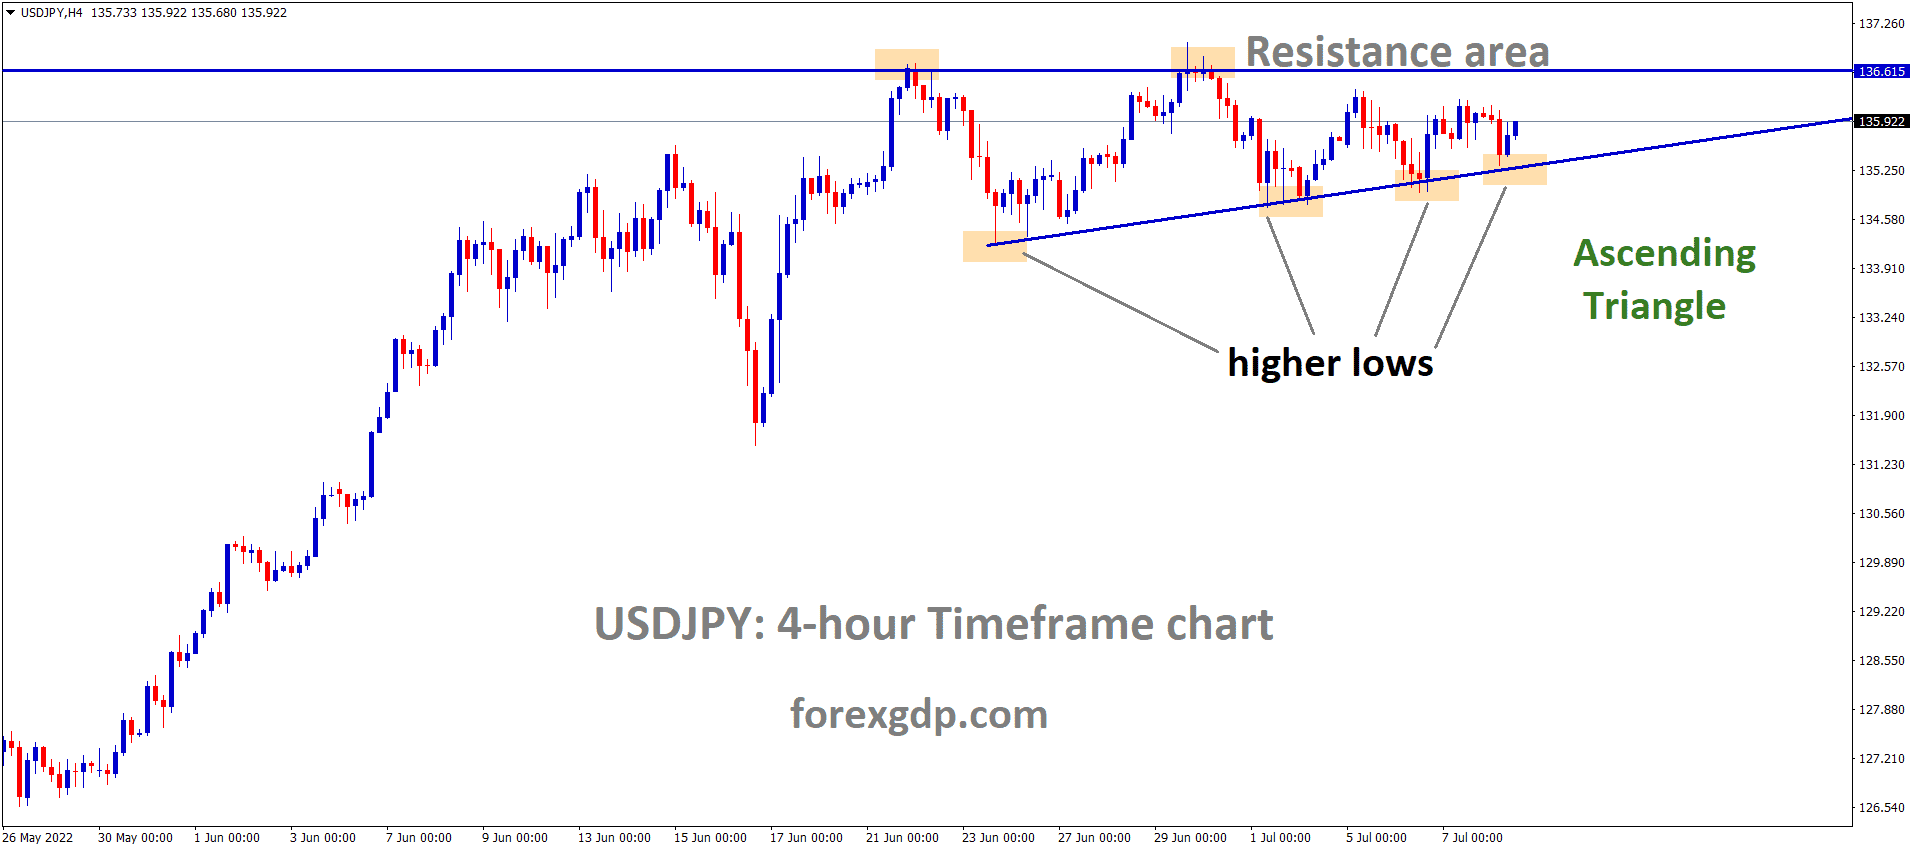 USDJPY is moving in an Ascending triangle pattern and the market has rebounded from the higher low area of the triangle pattern